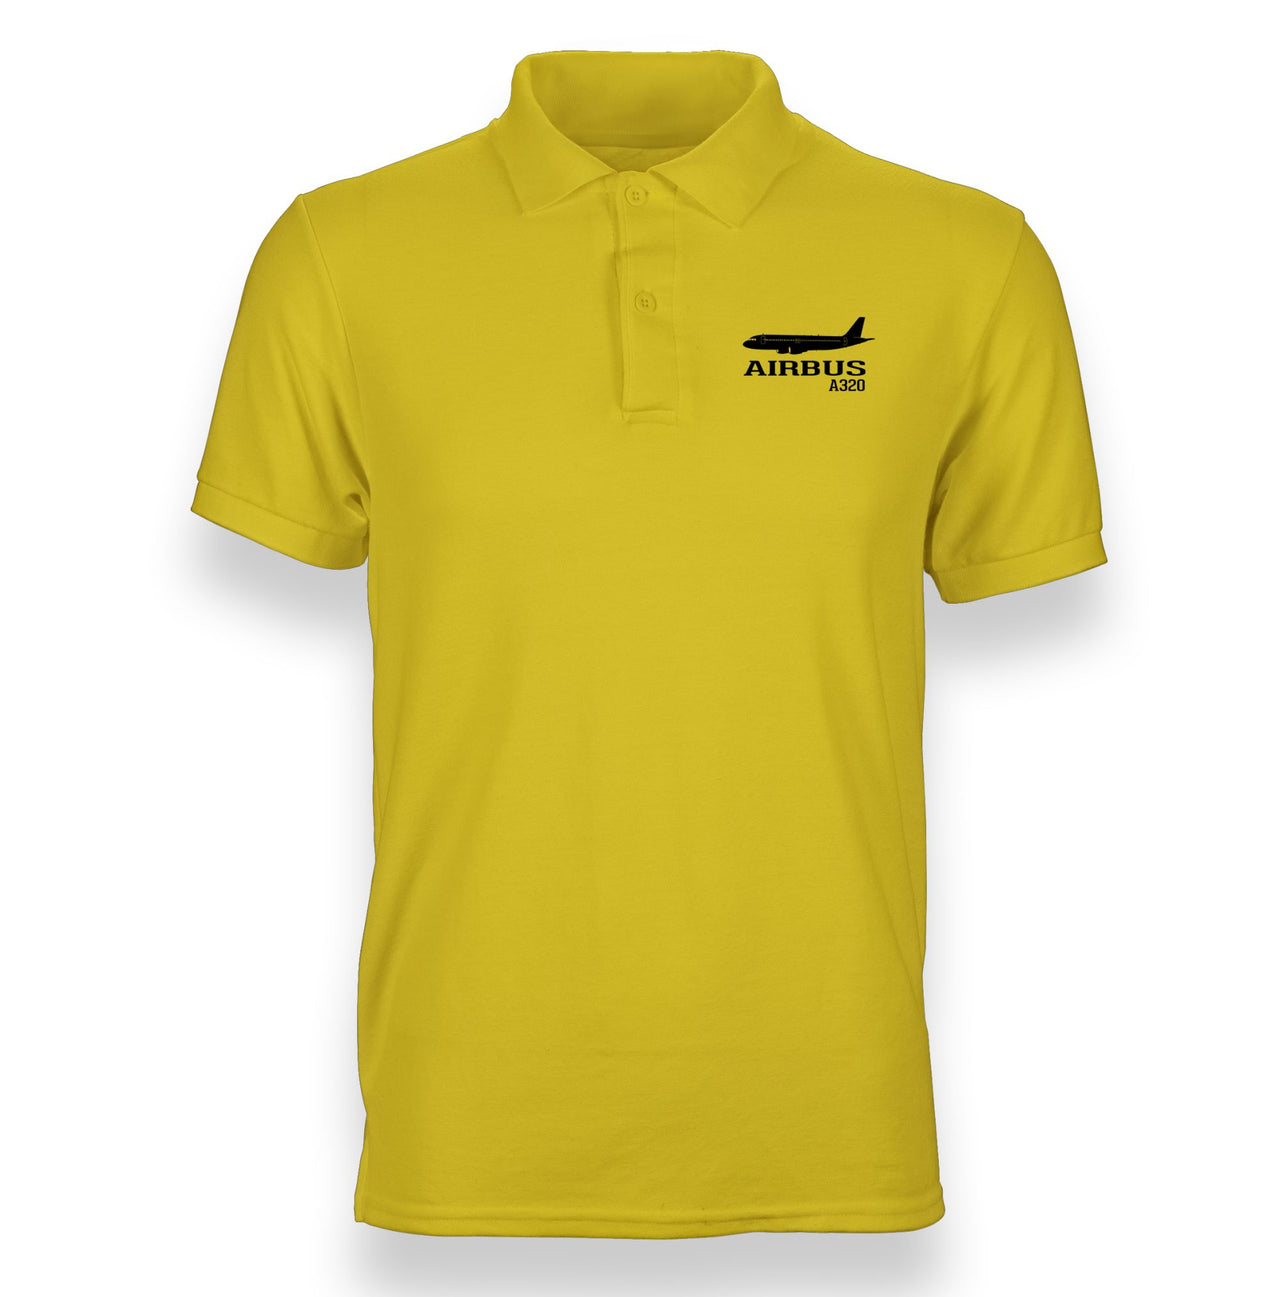 Airbus A320 Printed Designed "WOMEN" Polo T-Shirts